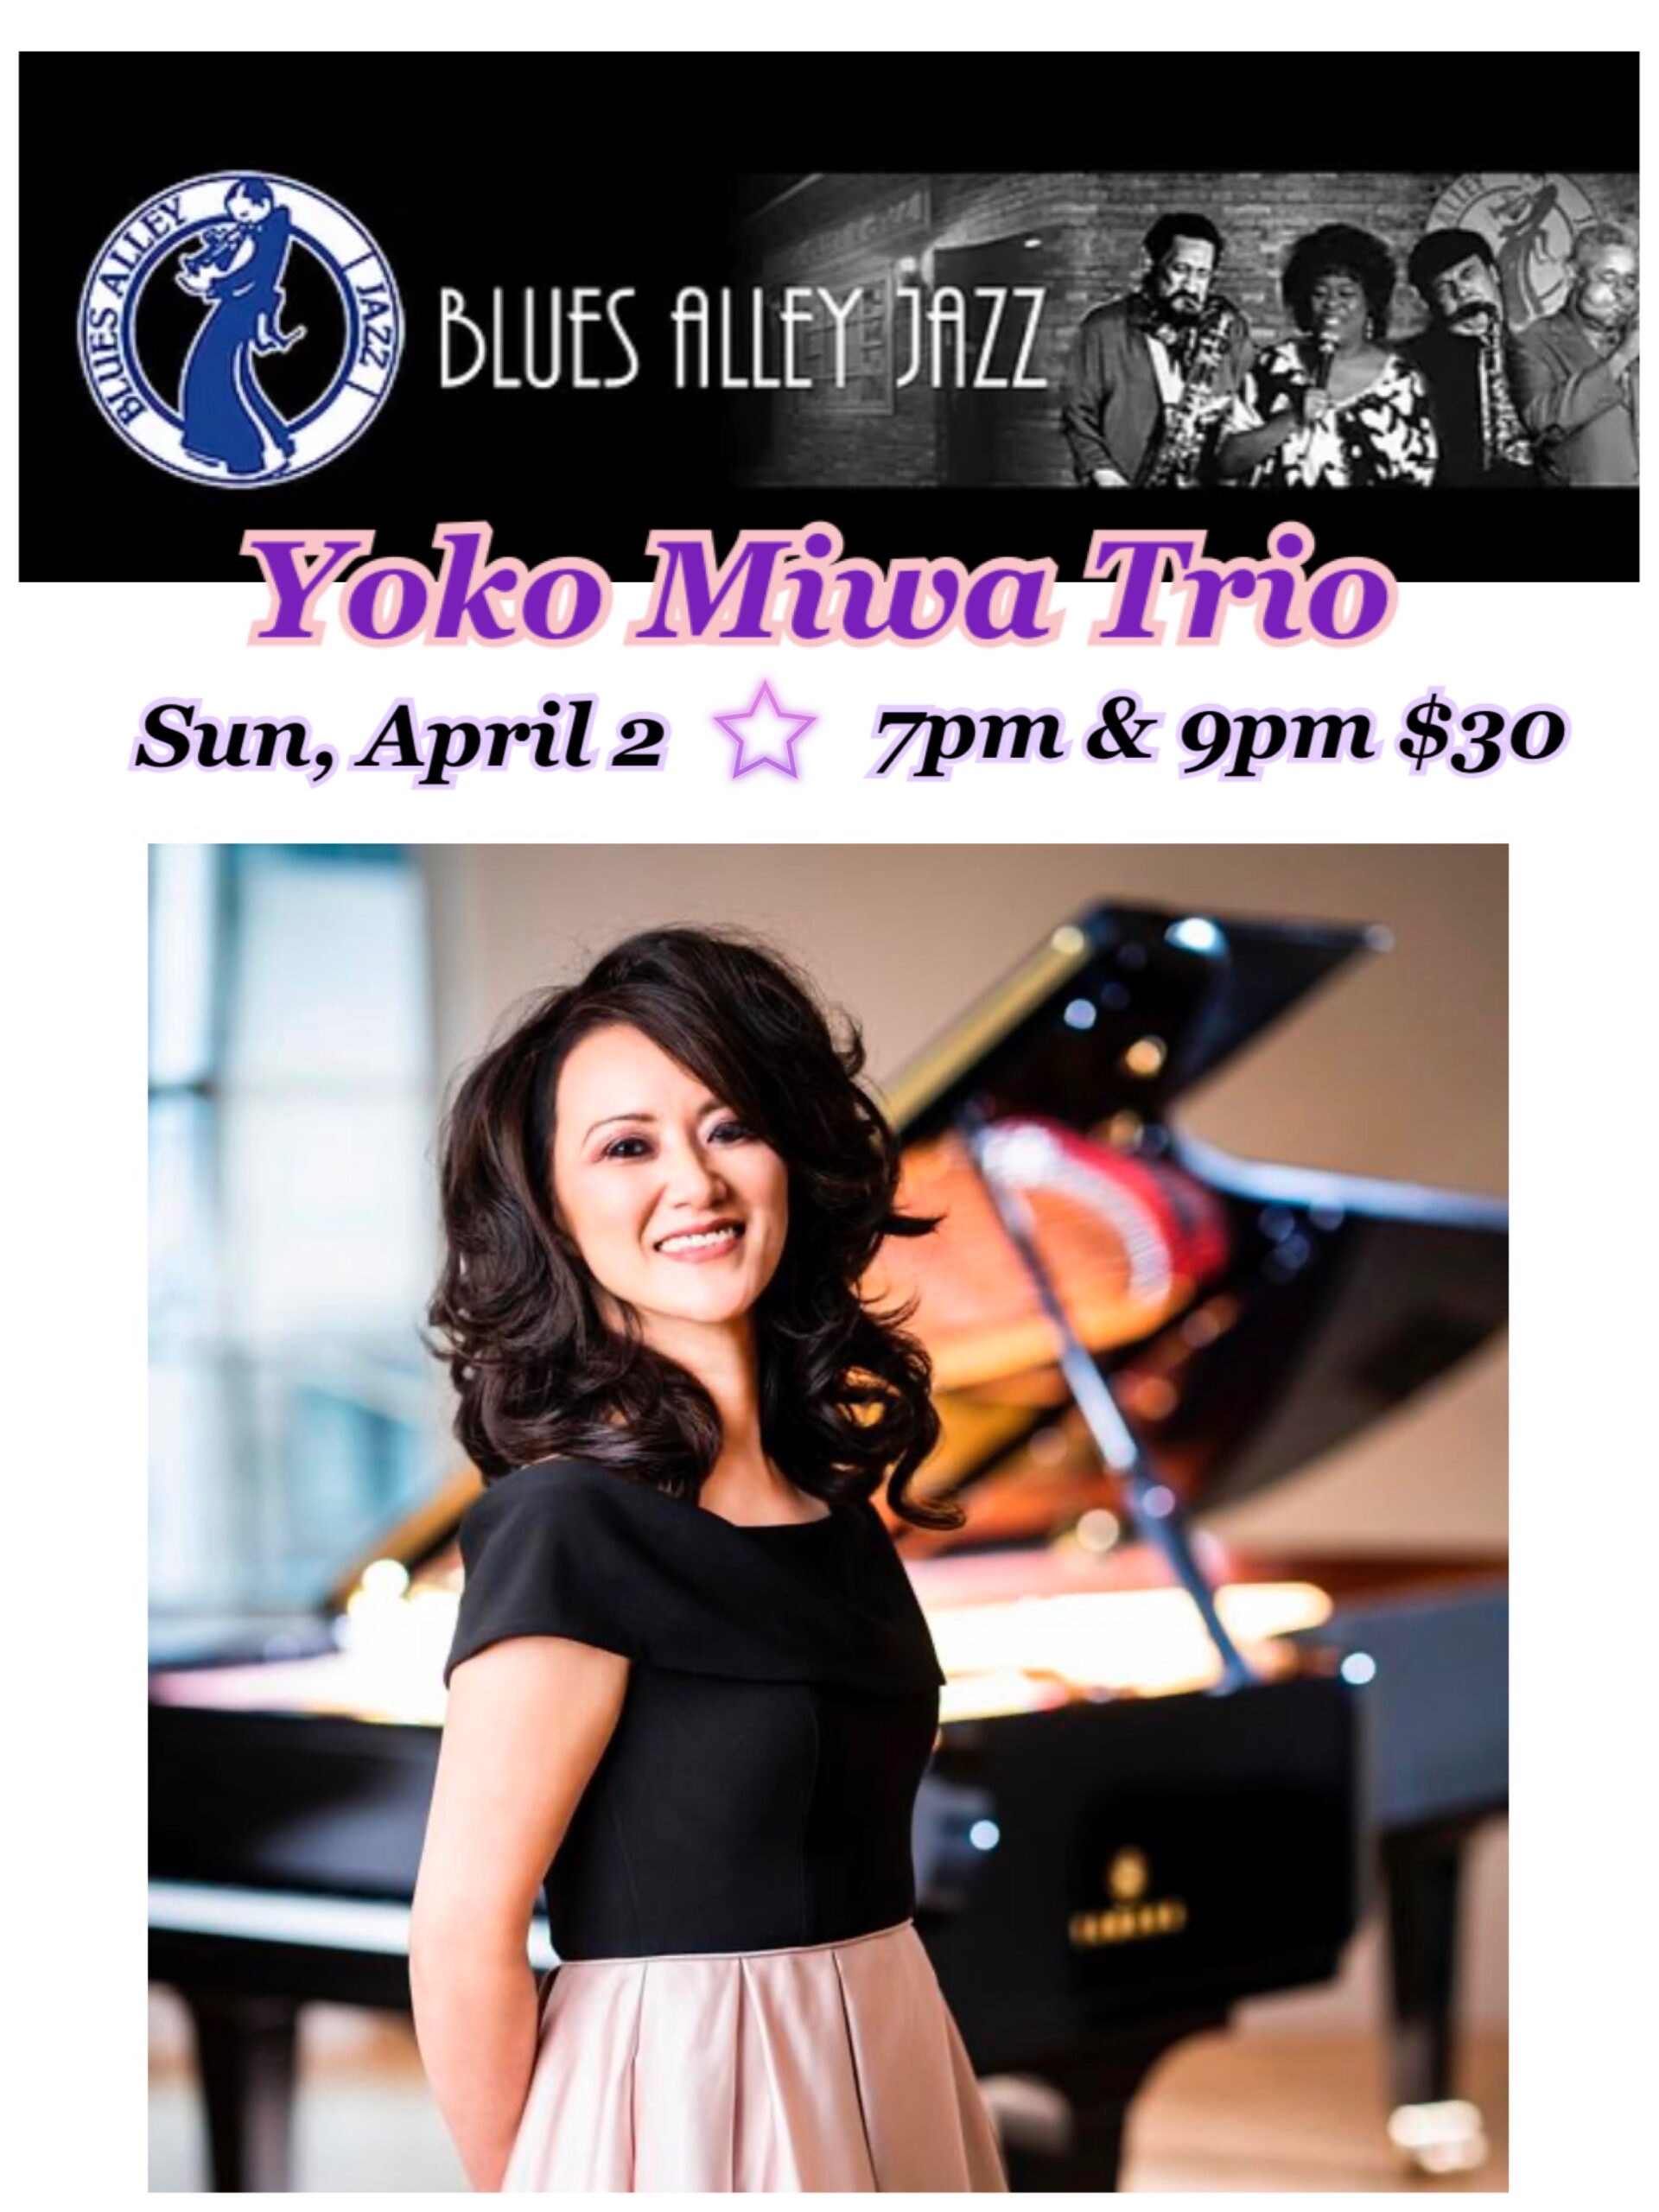 Yoko Miwa Trio playing Blues Alley in Washington DC Sunday, April 2, 2023. Two sets: 7pm and 9pm